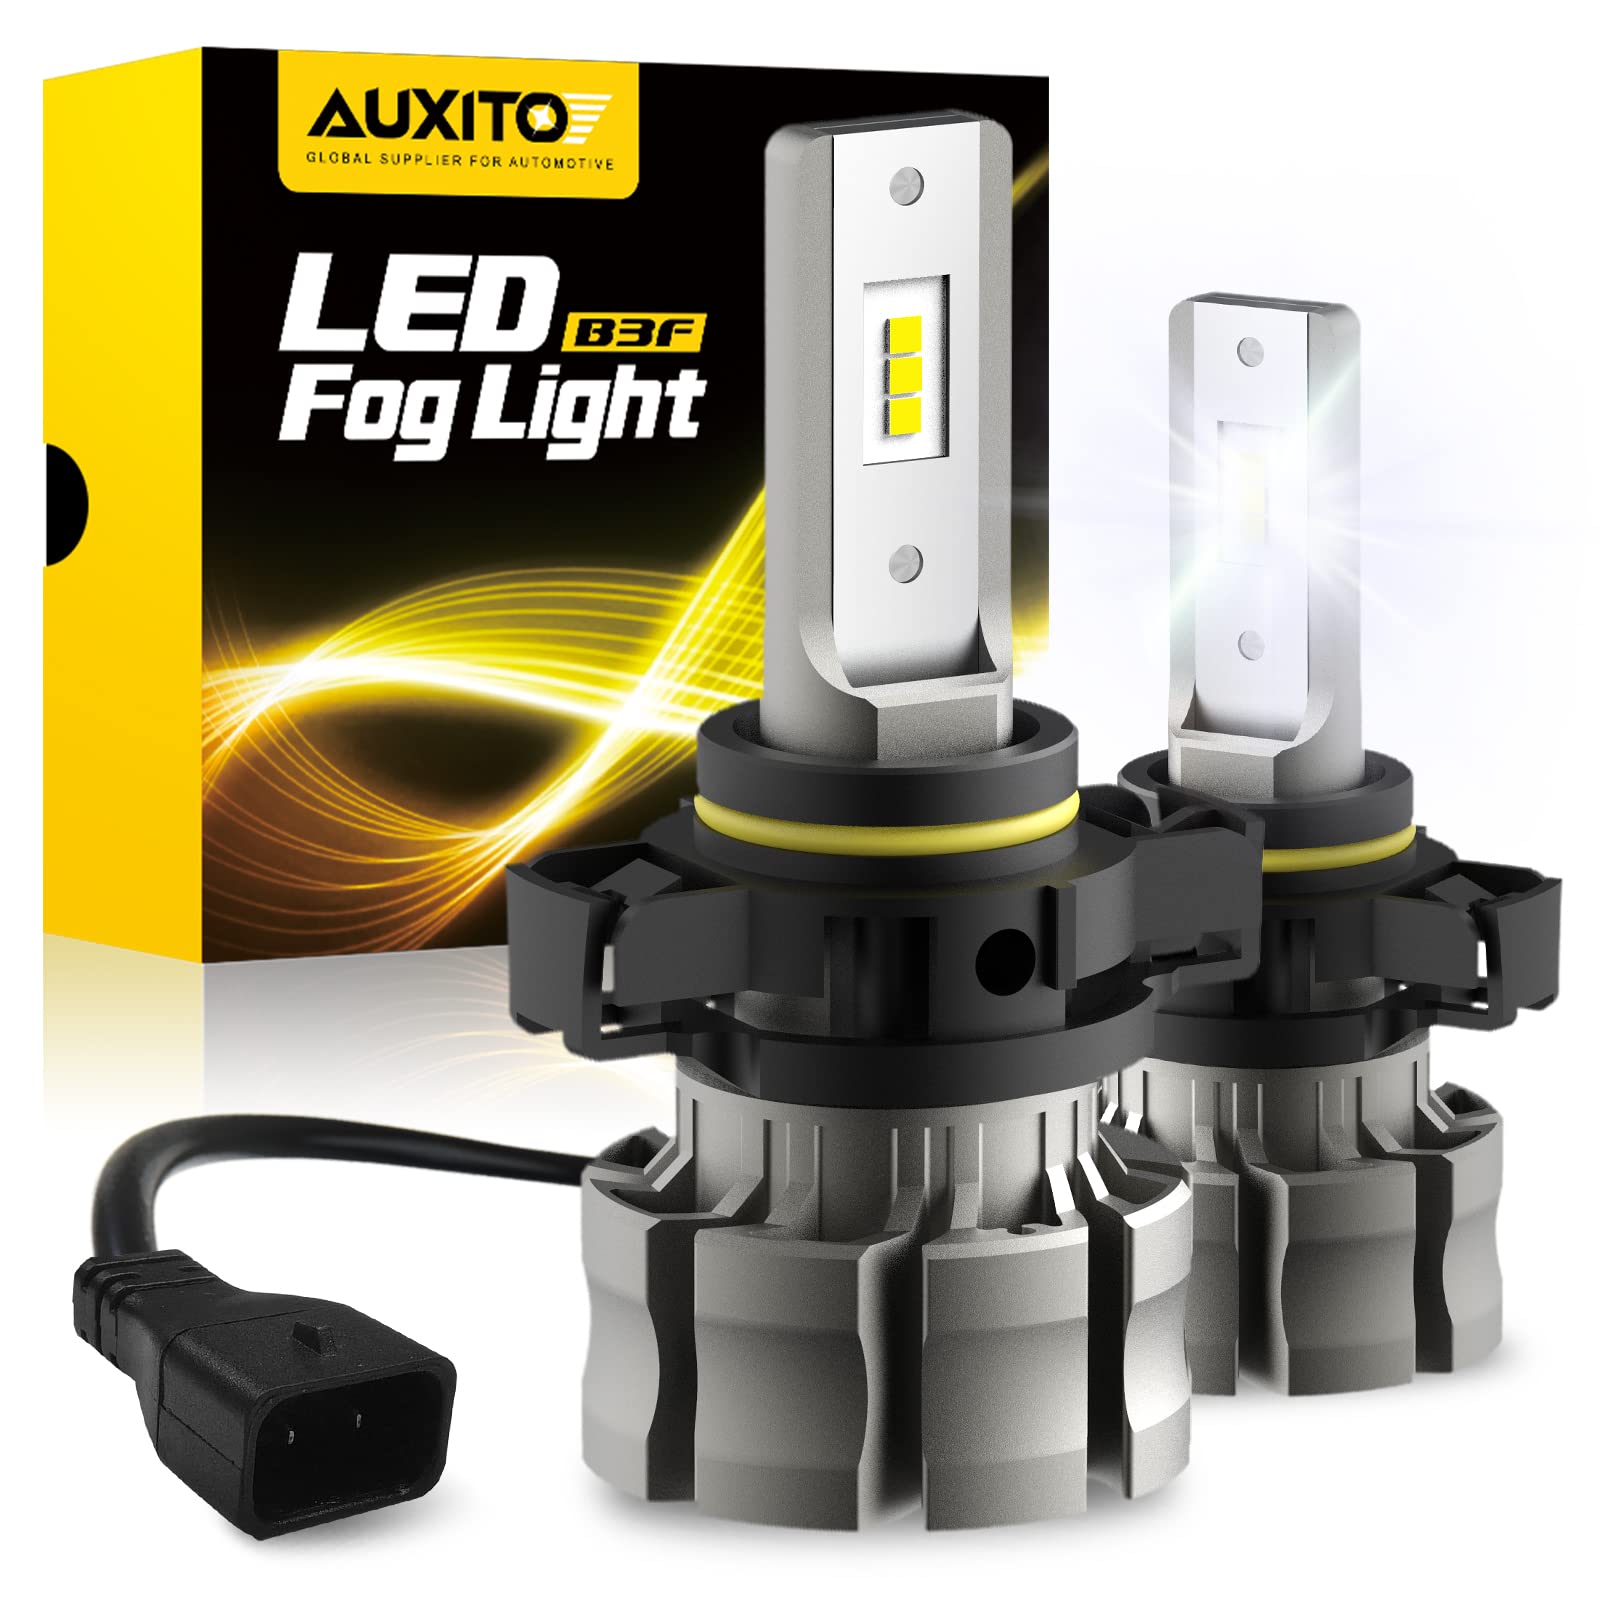 AUXITO 5202 LED Fog Light Bulbs, 6500K Cool White 6000 Lumen Plug And Play, 300% Brighter, 5201 PS19W 12085 PS24W Daytime Running Lights Replacement (Pack of 2)